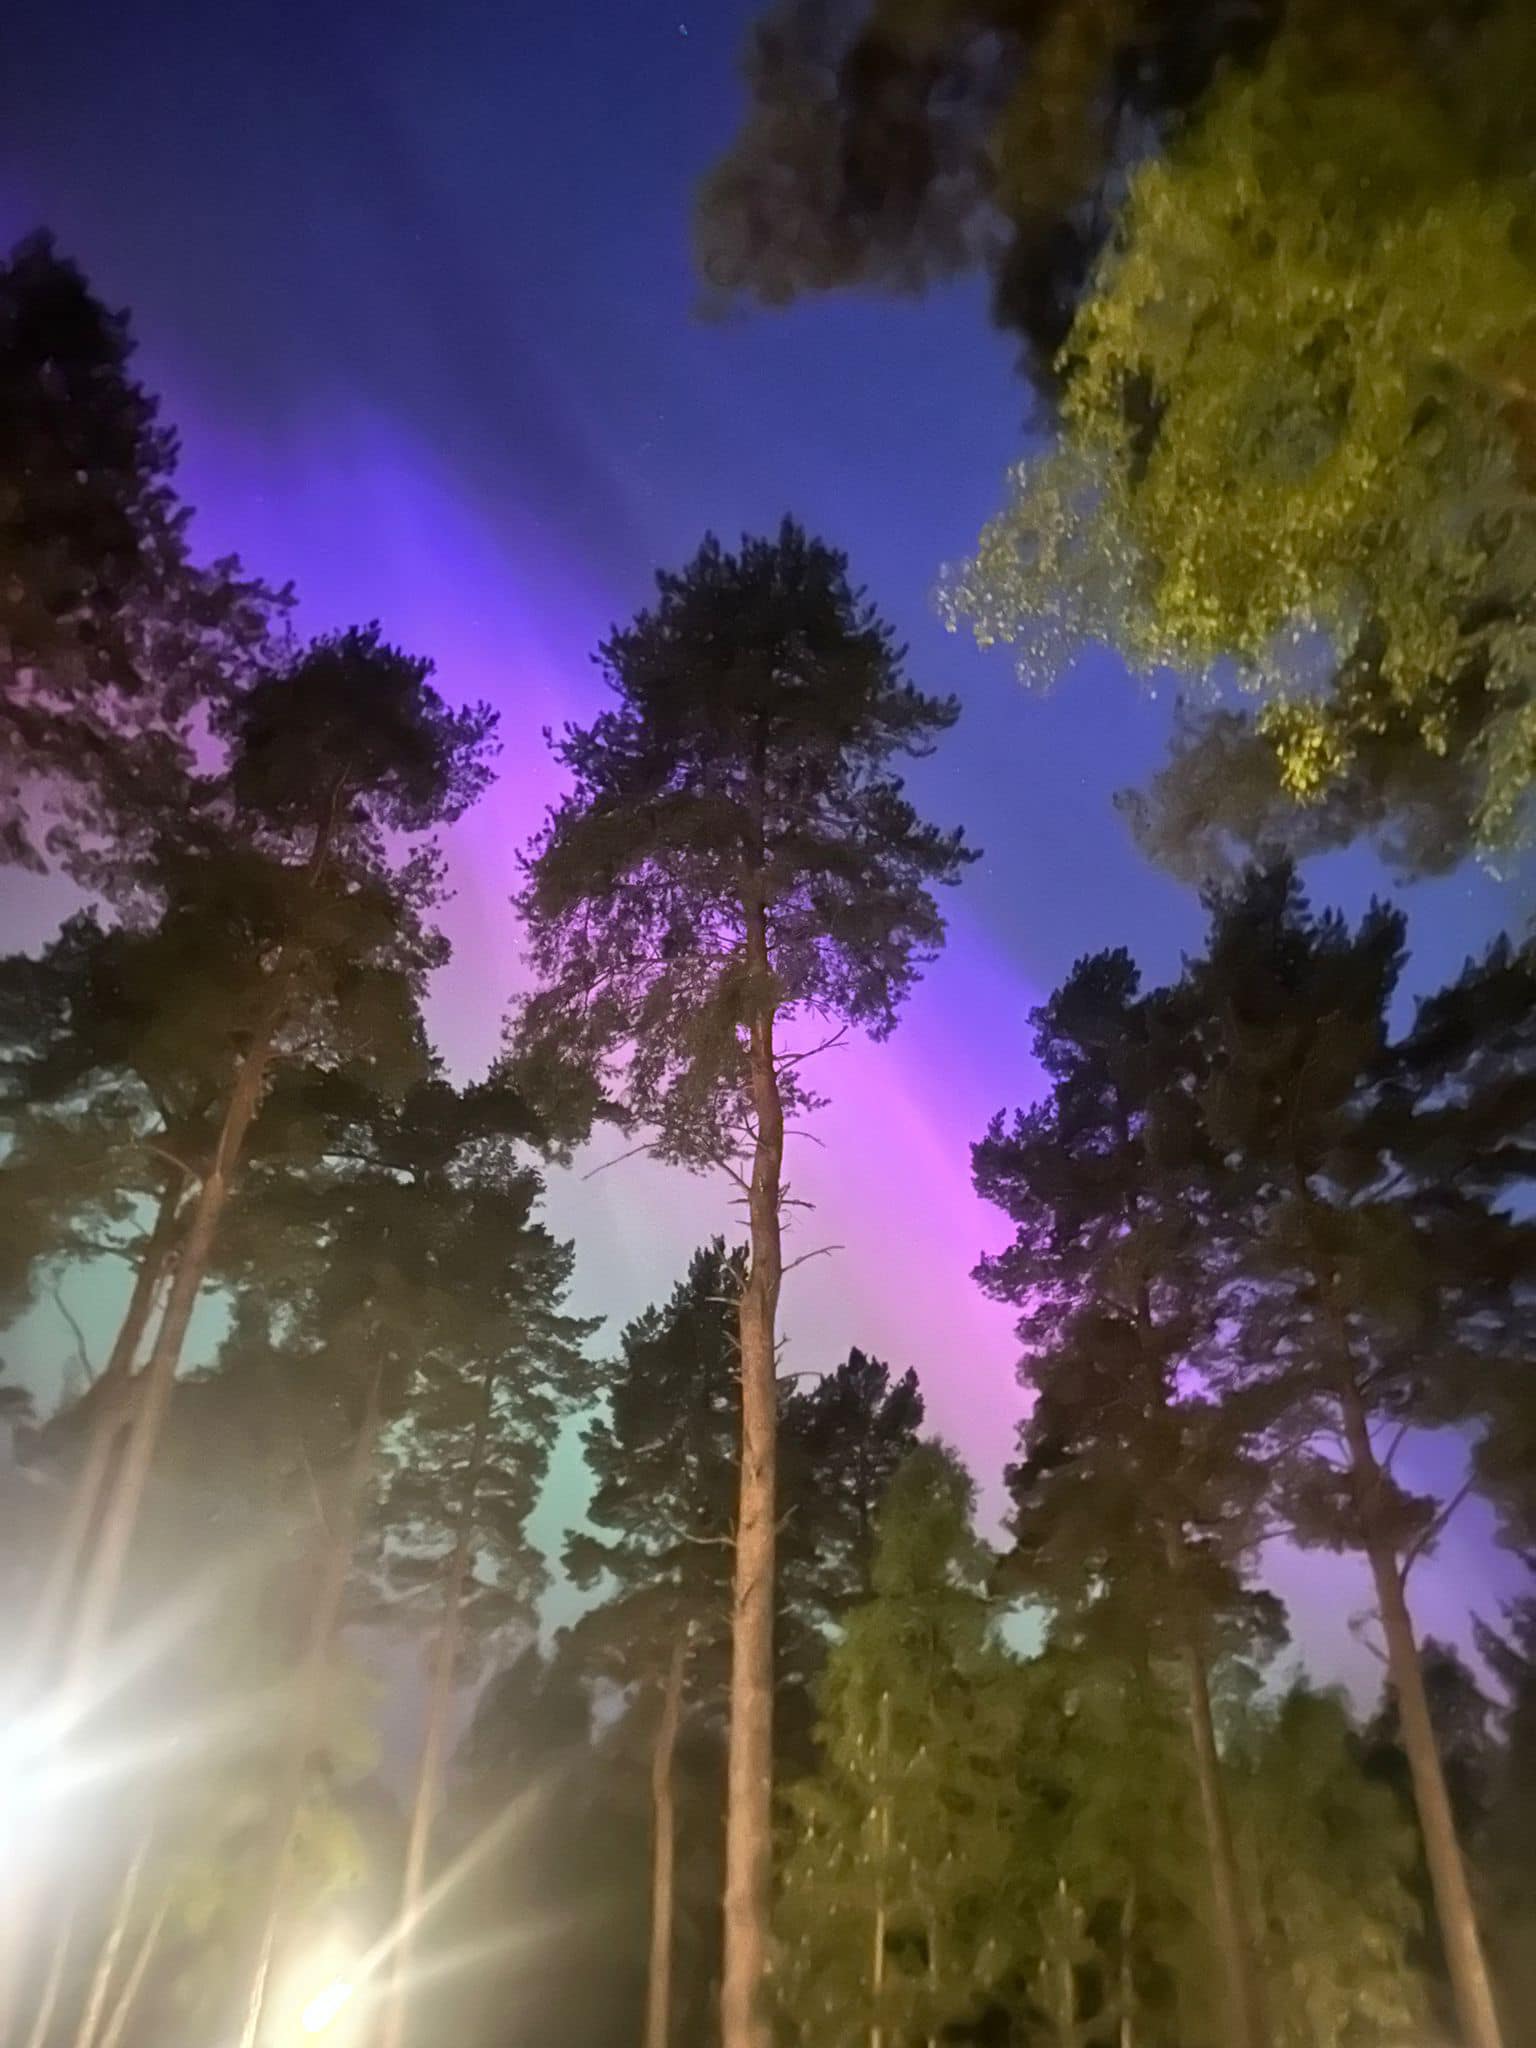 The Northern Lights pictured over Greater Manchester